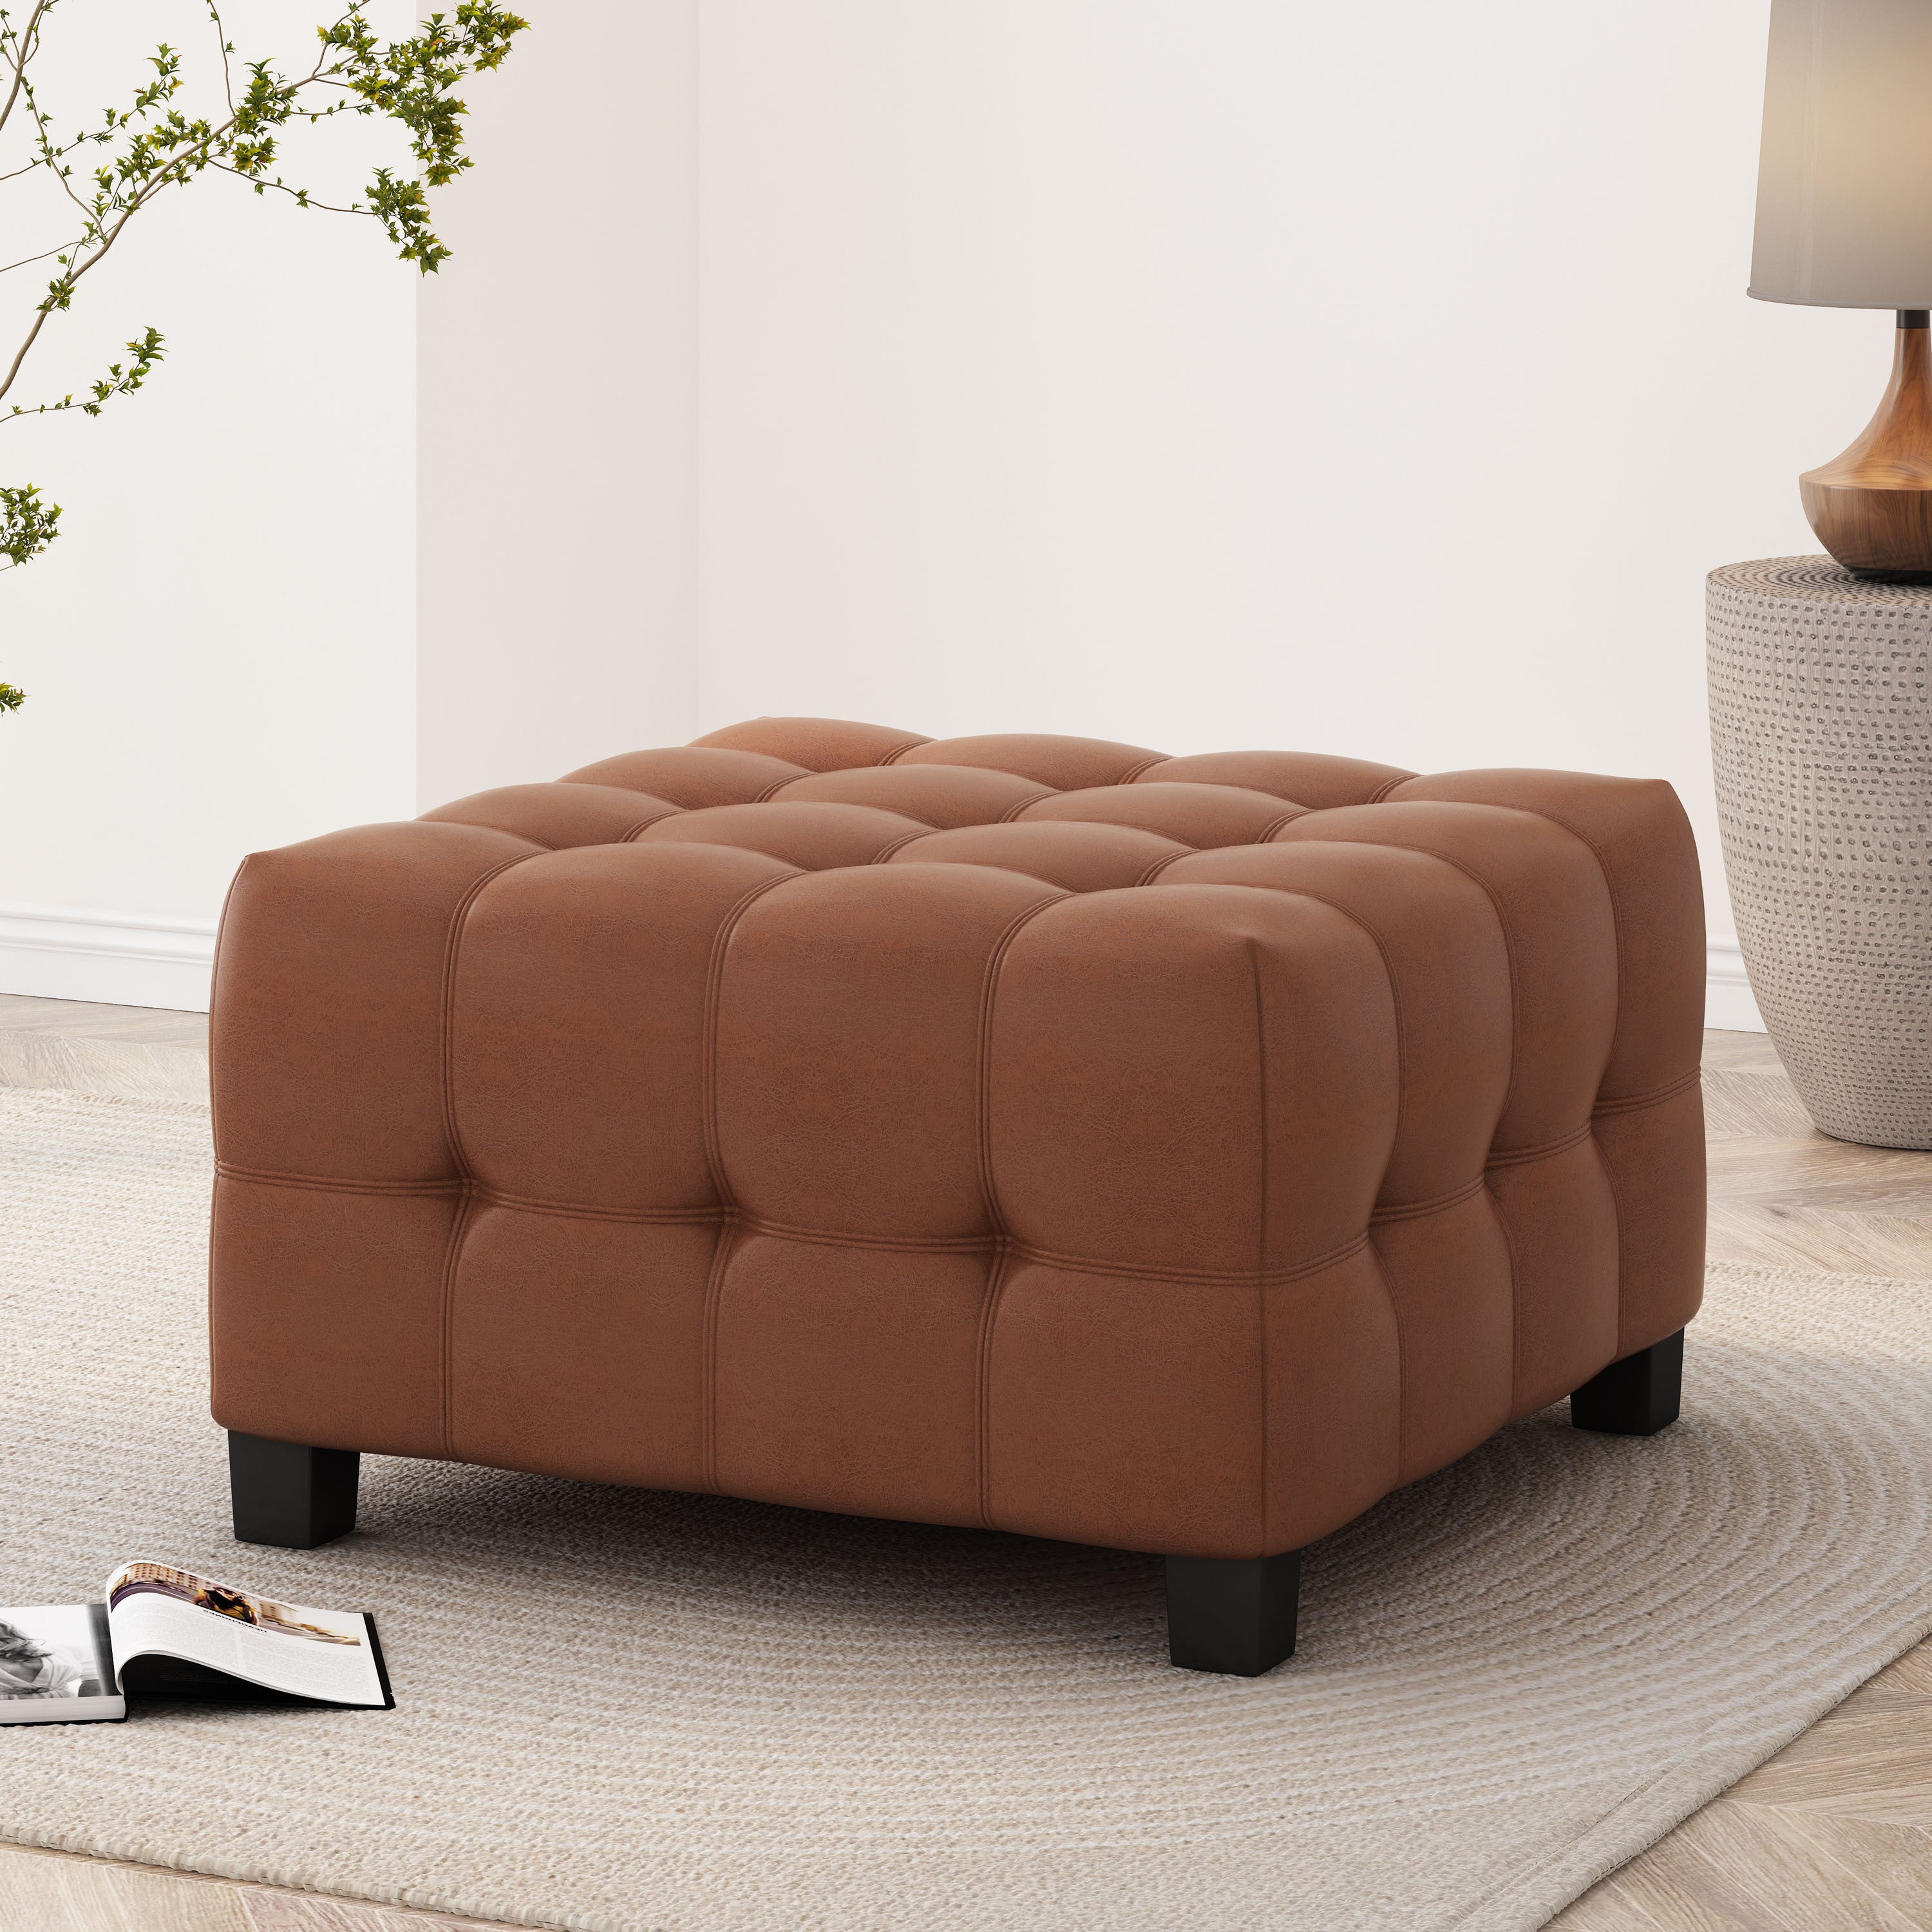 Modern Tufted Faux Leather Ottoman - Light Brown